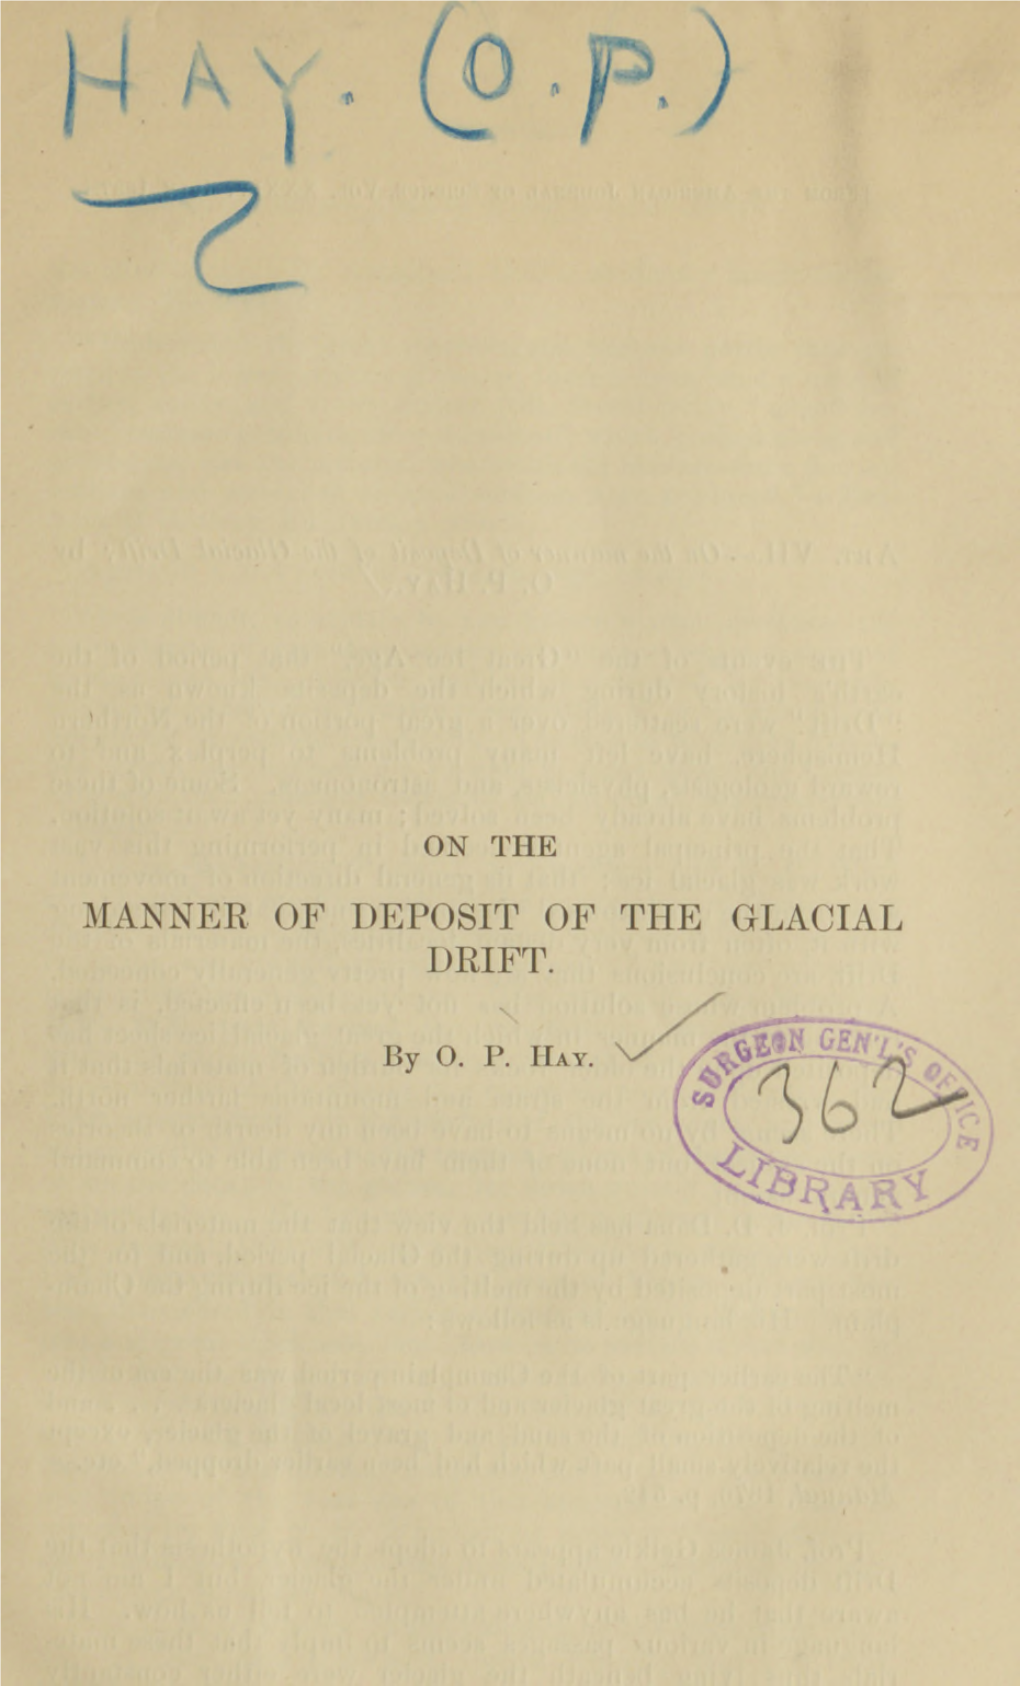 On the Manner of Deposit of the Glacial Drift